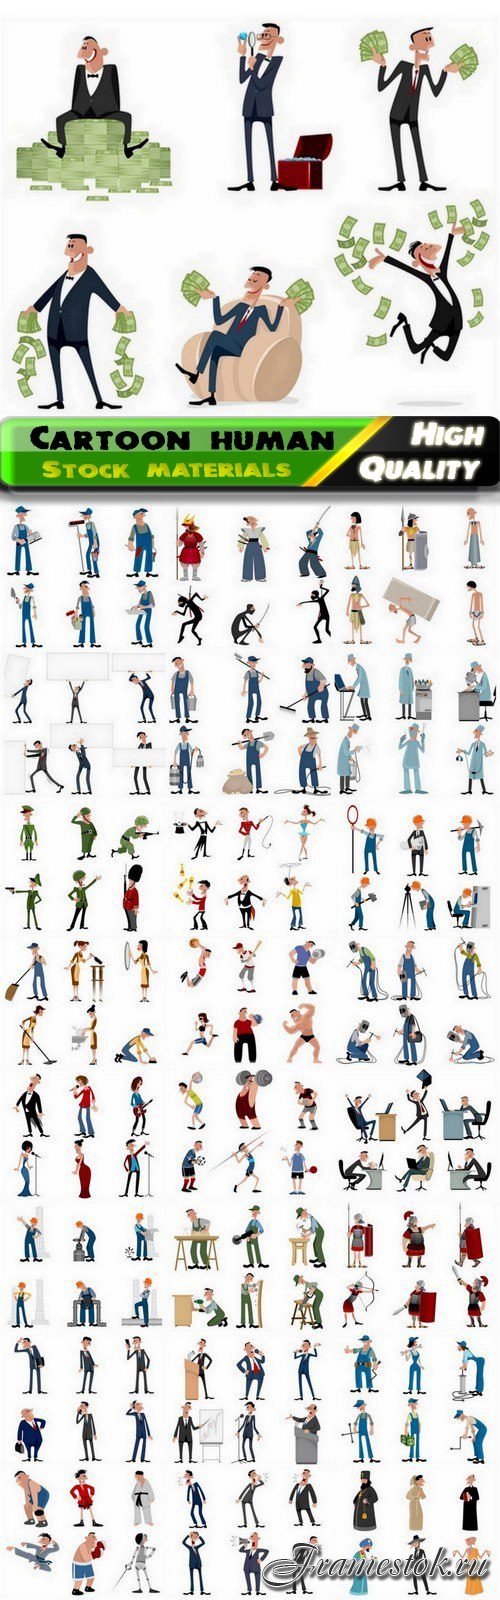 Funny cartoon human and people of different profession 3 - 25 Eps